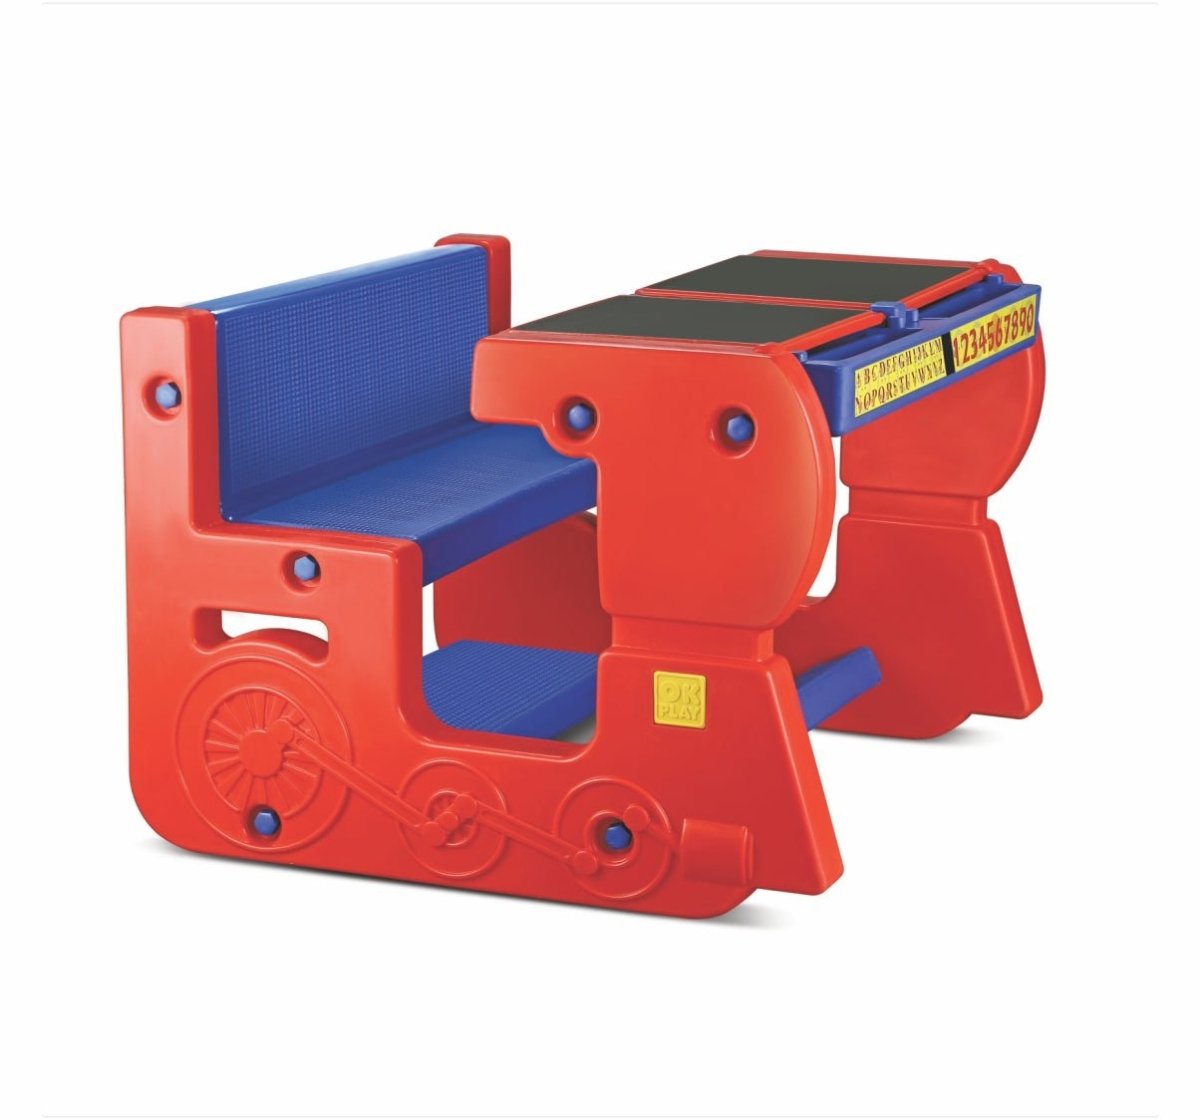 OK Play Double Desk n Chair Kids - Red & Blue - FTFF000034